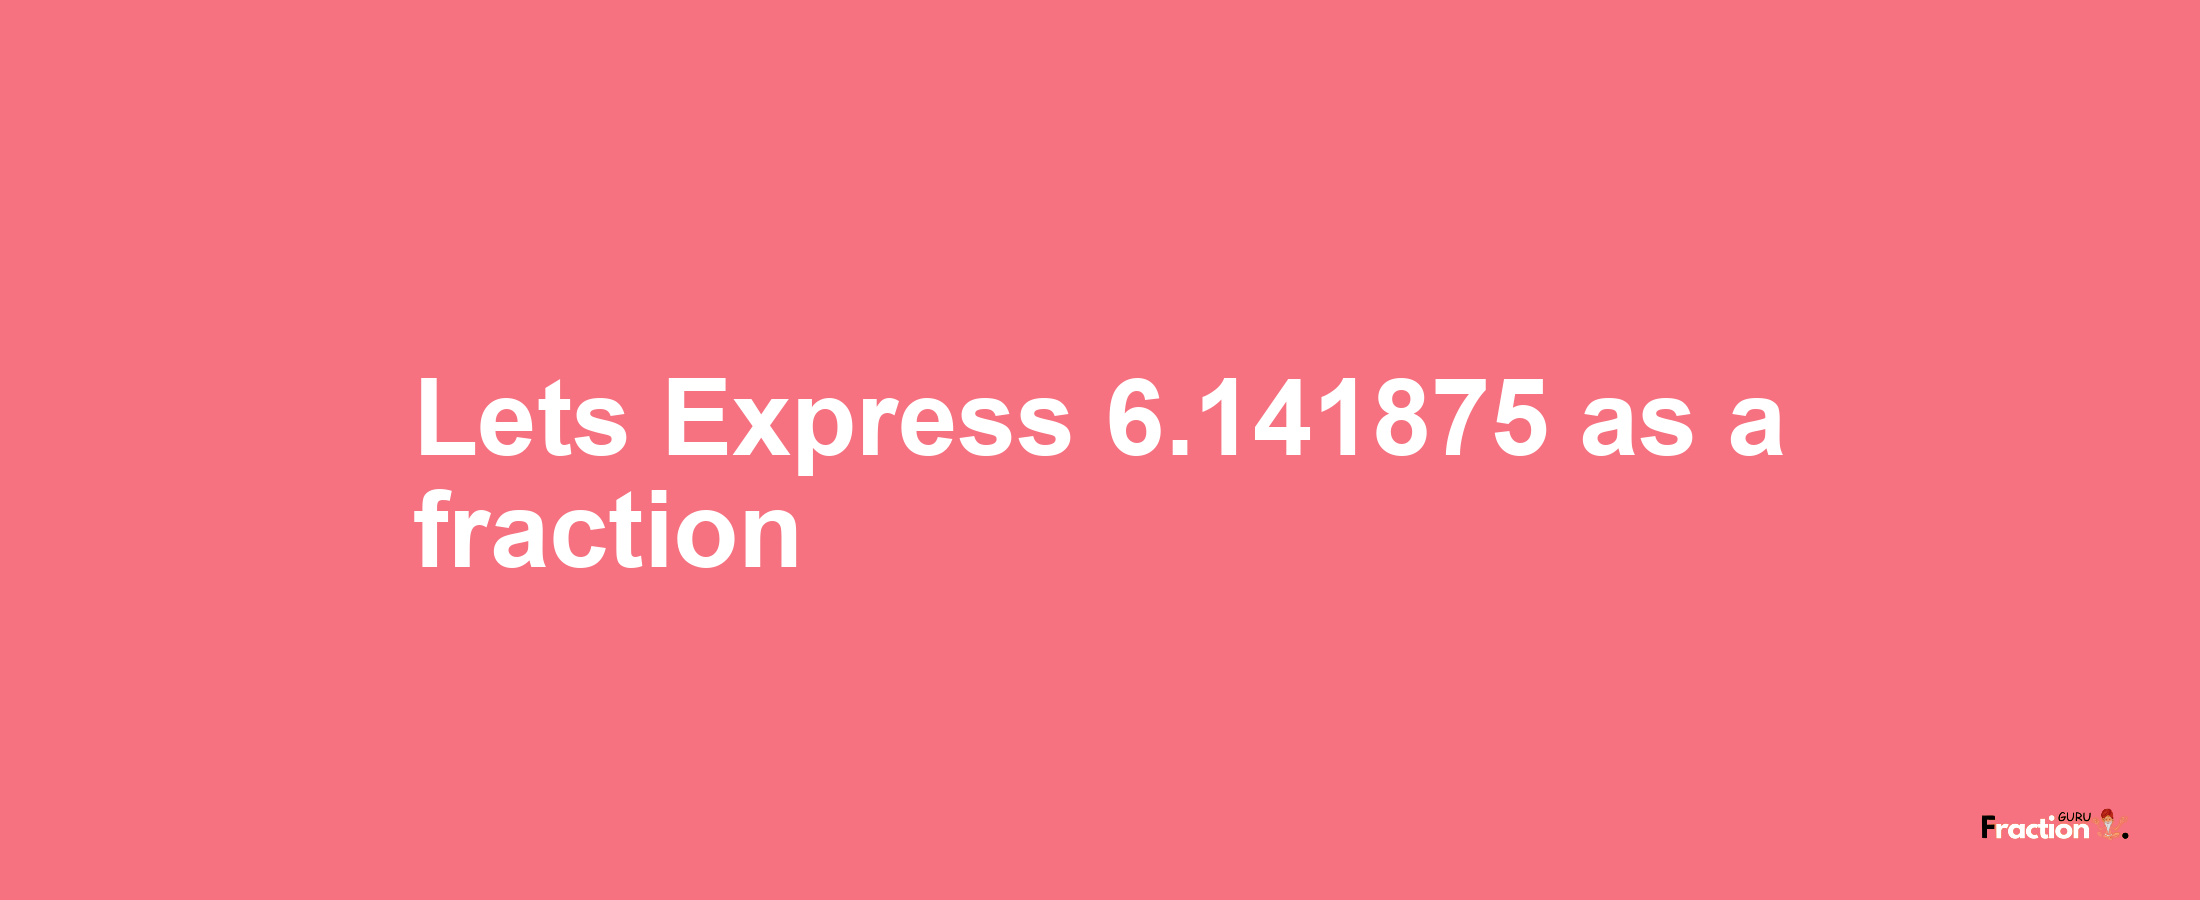 Lets Express 6.141875 as afraction